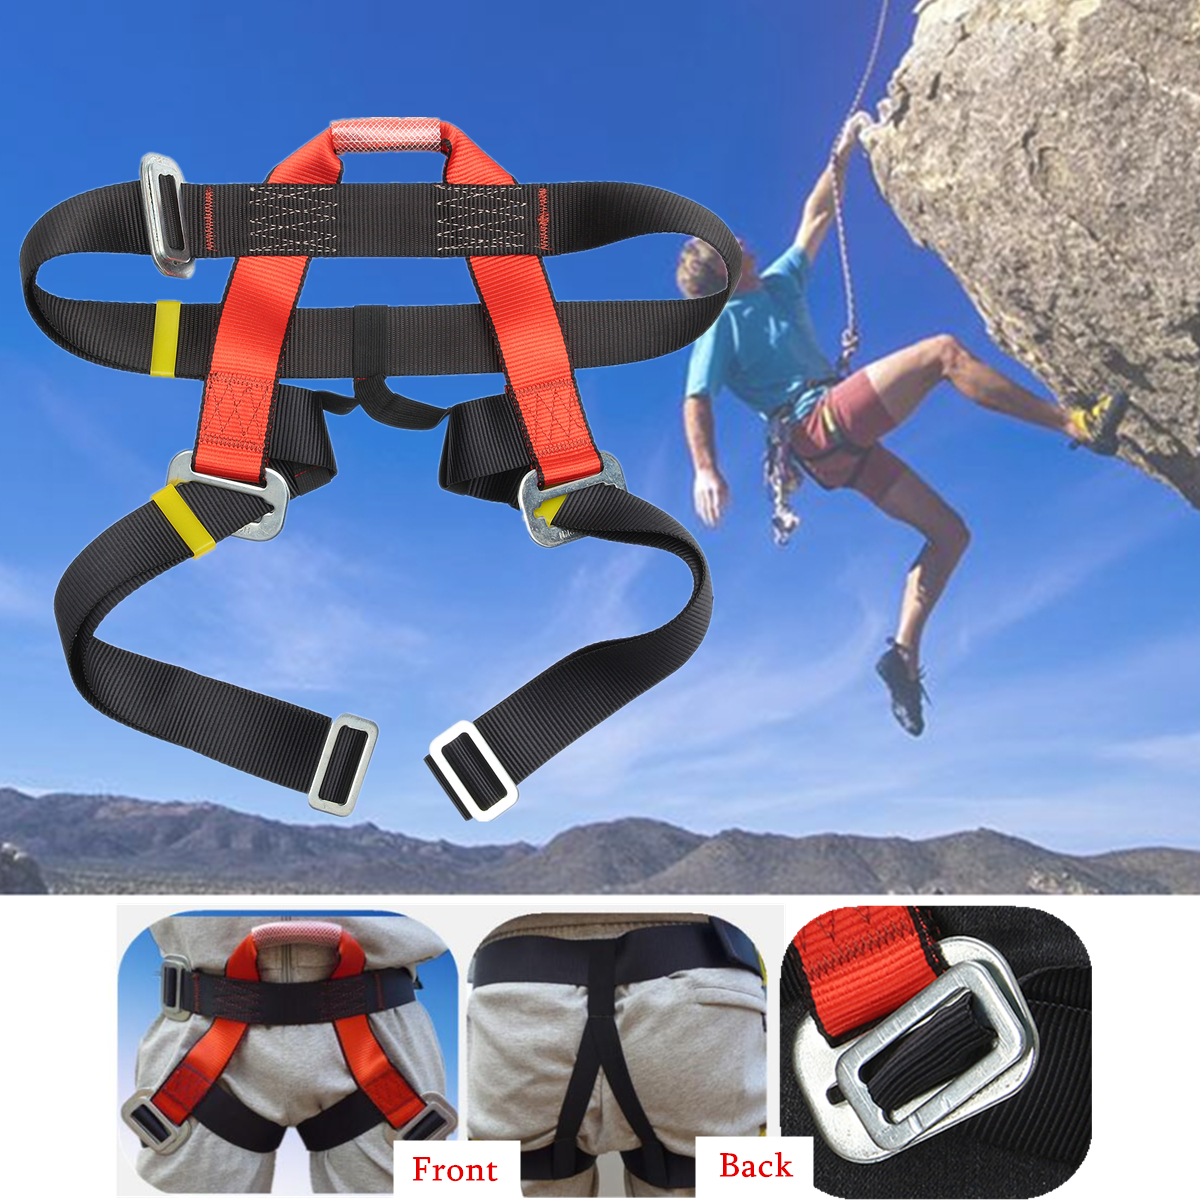 Outdoor-Mountain-Rock-Climbing-Rappelling-Harness-Bust-Belt-Rescue-Safety-Seat-Sitting-Strap-1130415-1